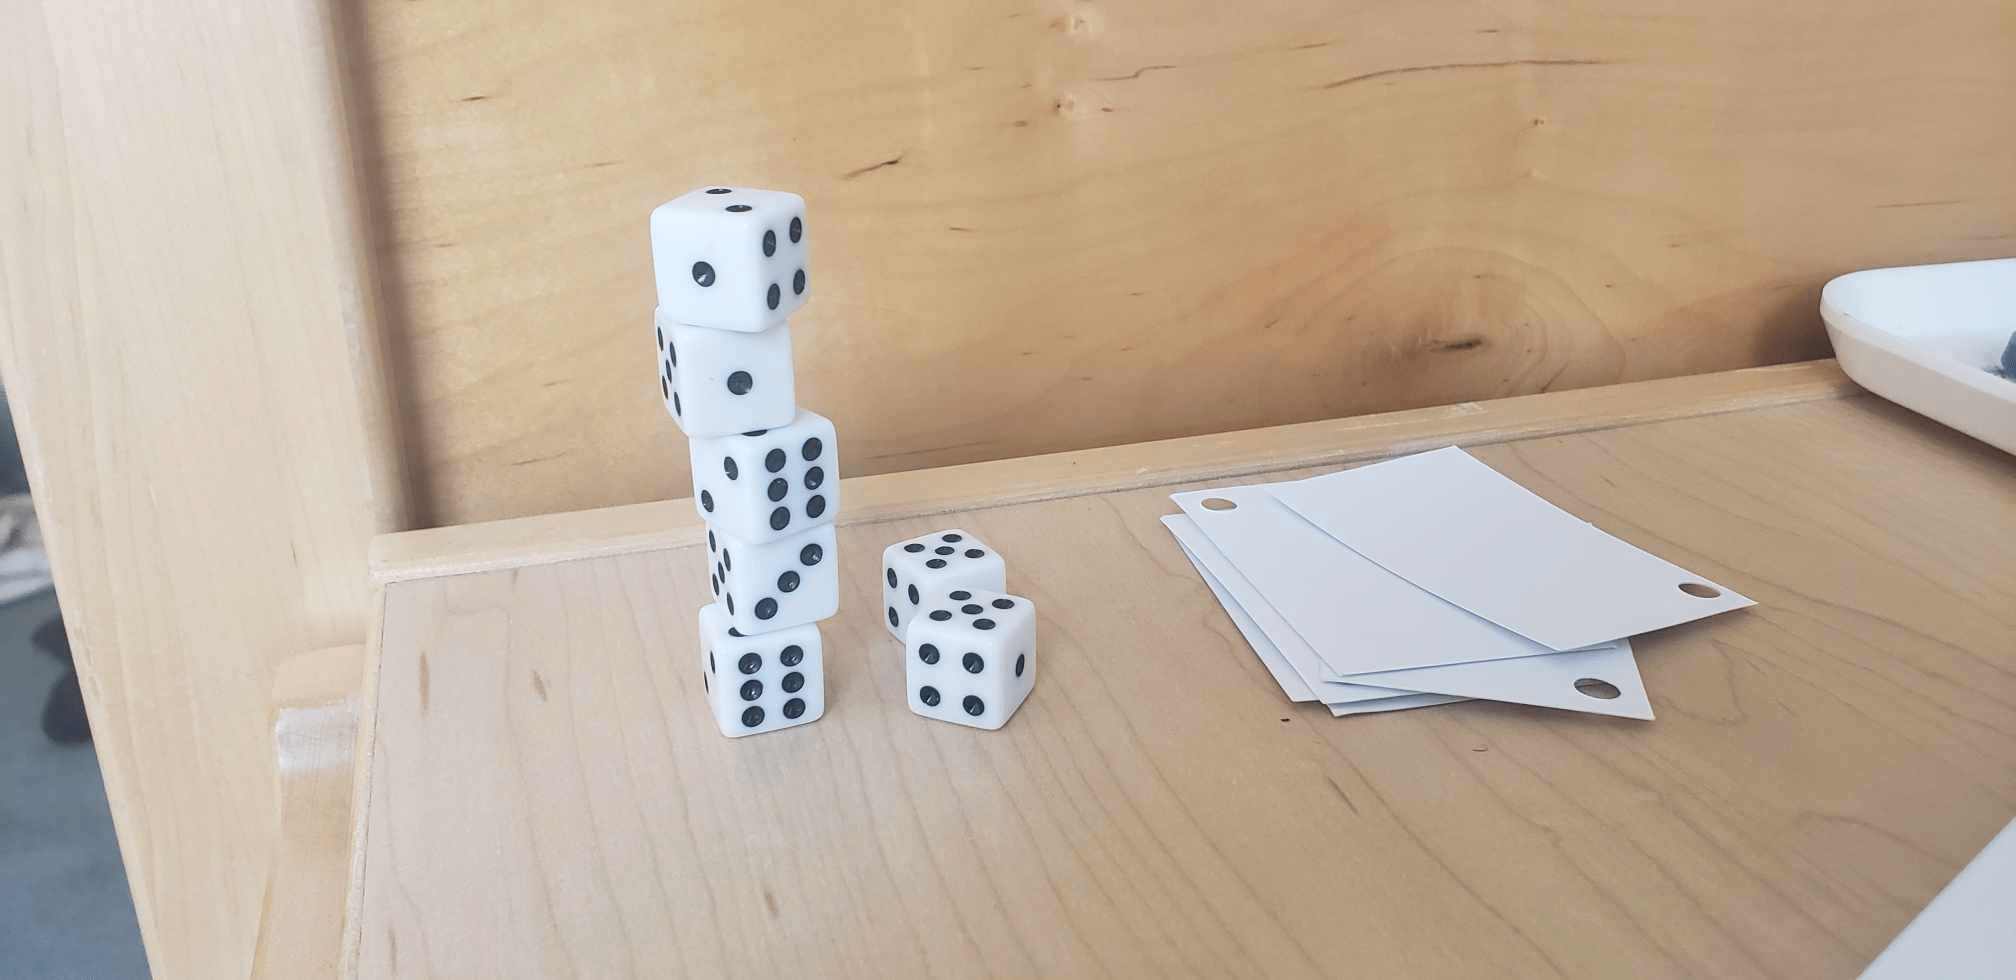 The game Stack. There is a tower of stacked dice next to a stack of cards.